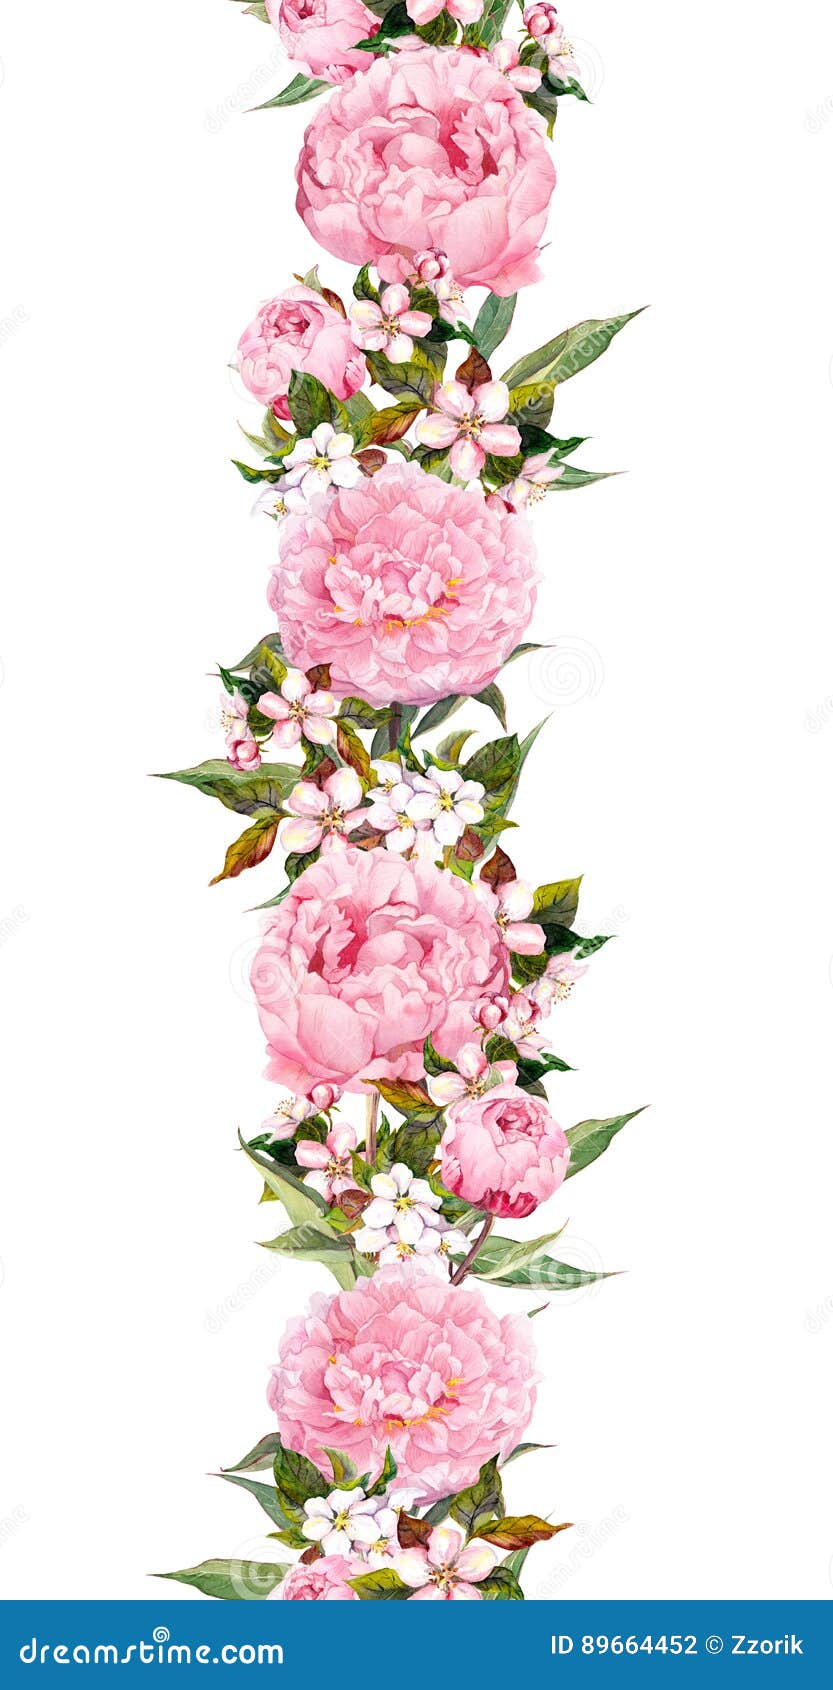 Floral Border - Peony and Cherry Blossom Flowers. Seamless Wedding